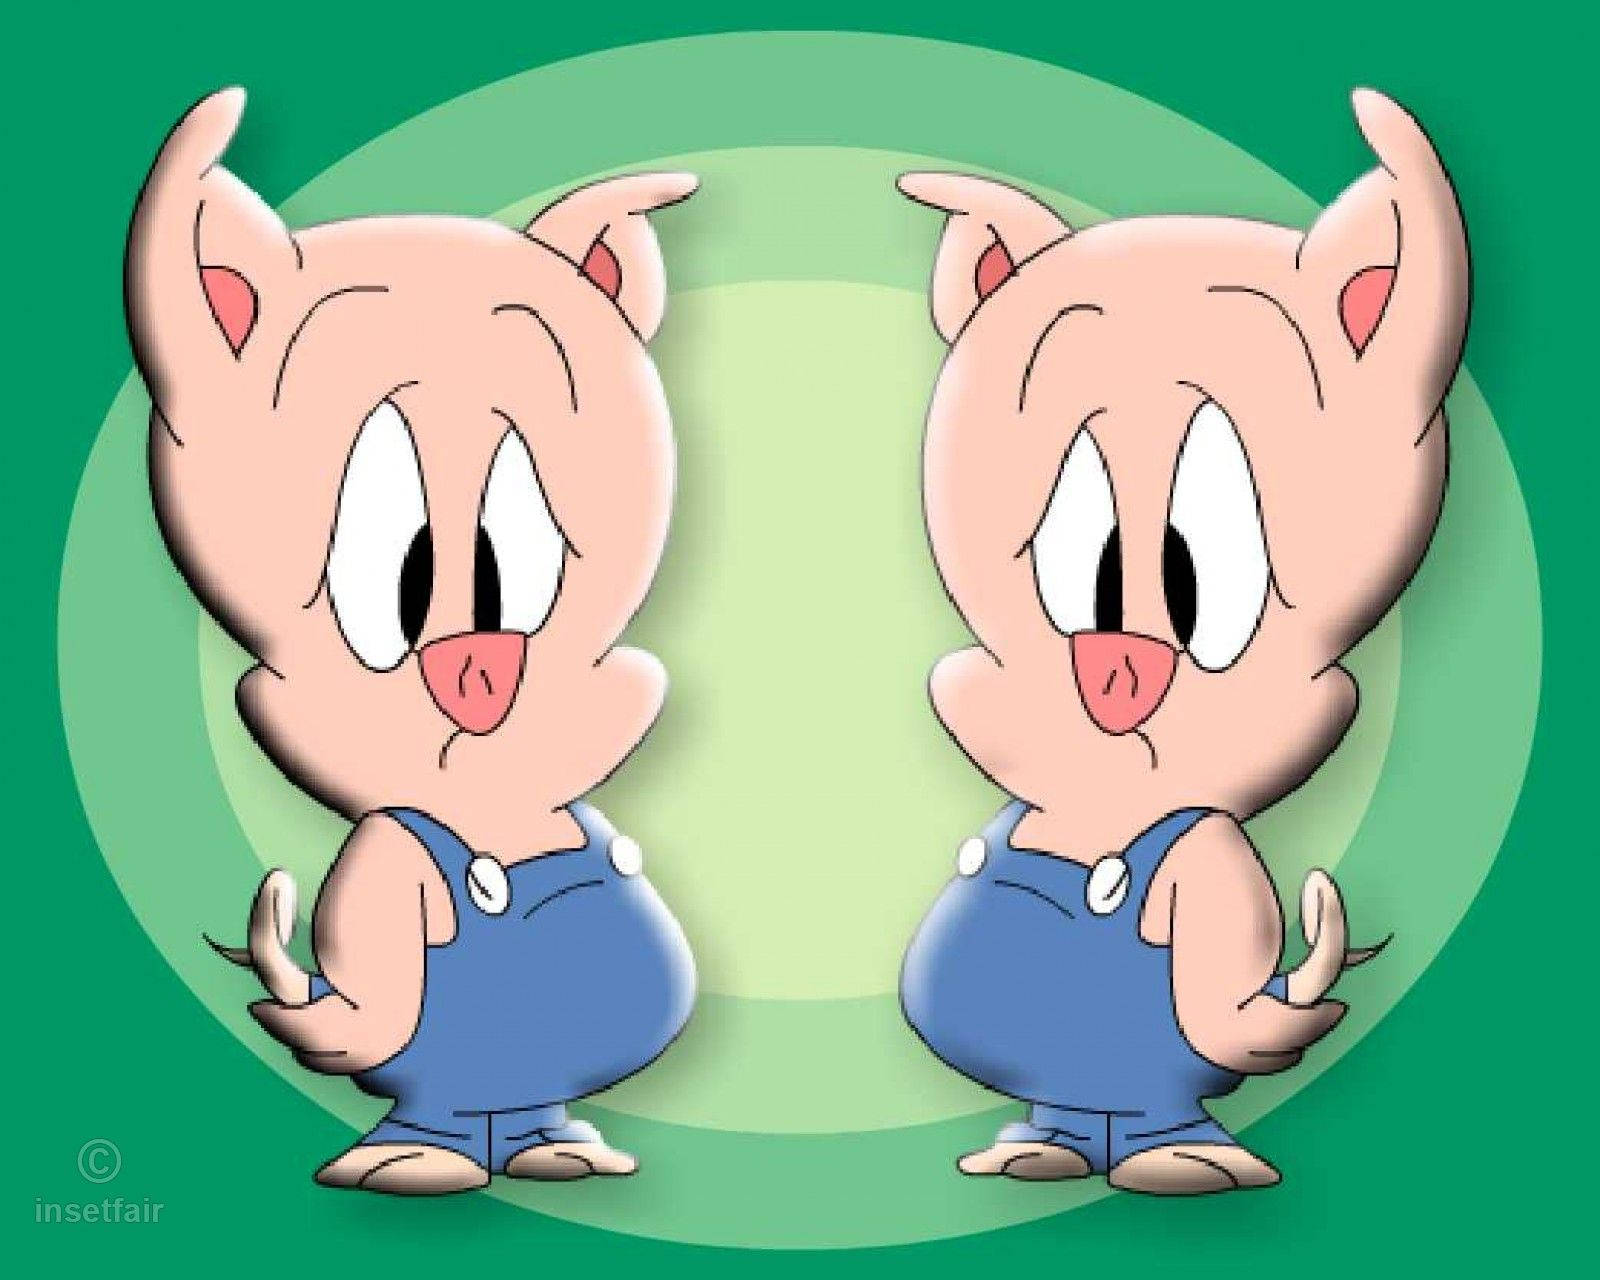 Porky Pig Fictional Character